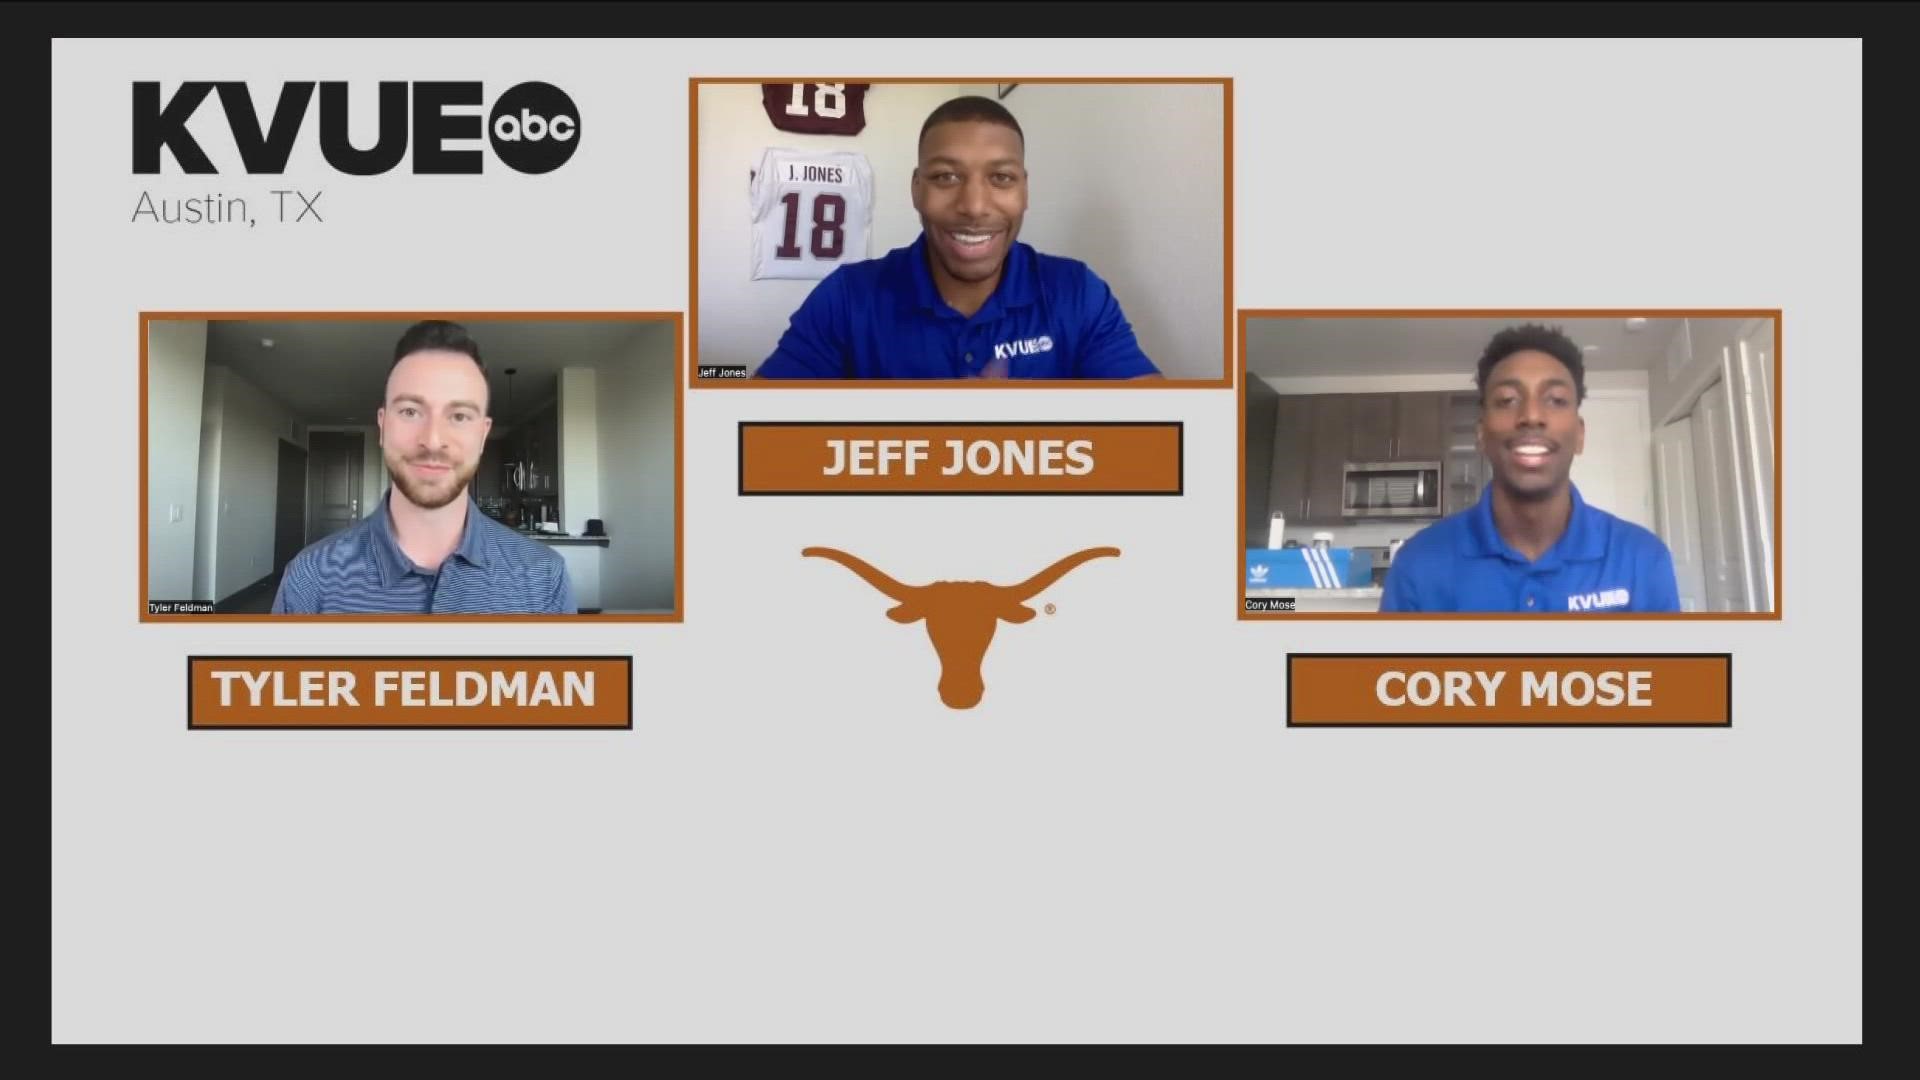 The KVUE Sports team discusses the Texas Longhorns Week 5 matchup against West Virginia and provides predictions for the final score.